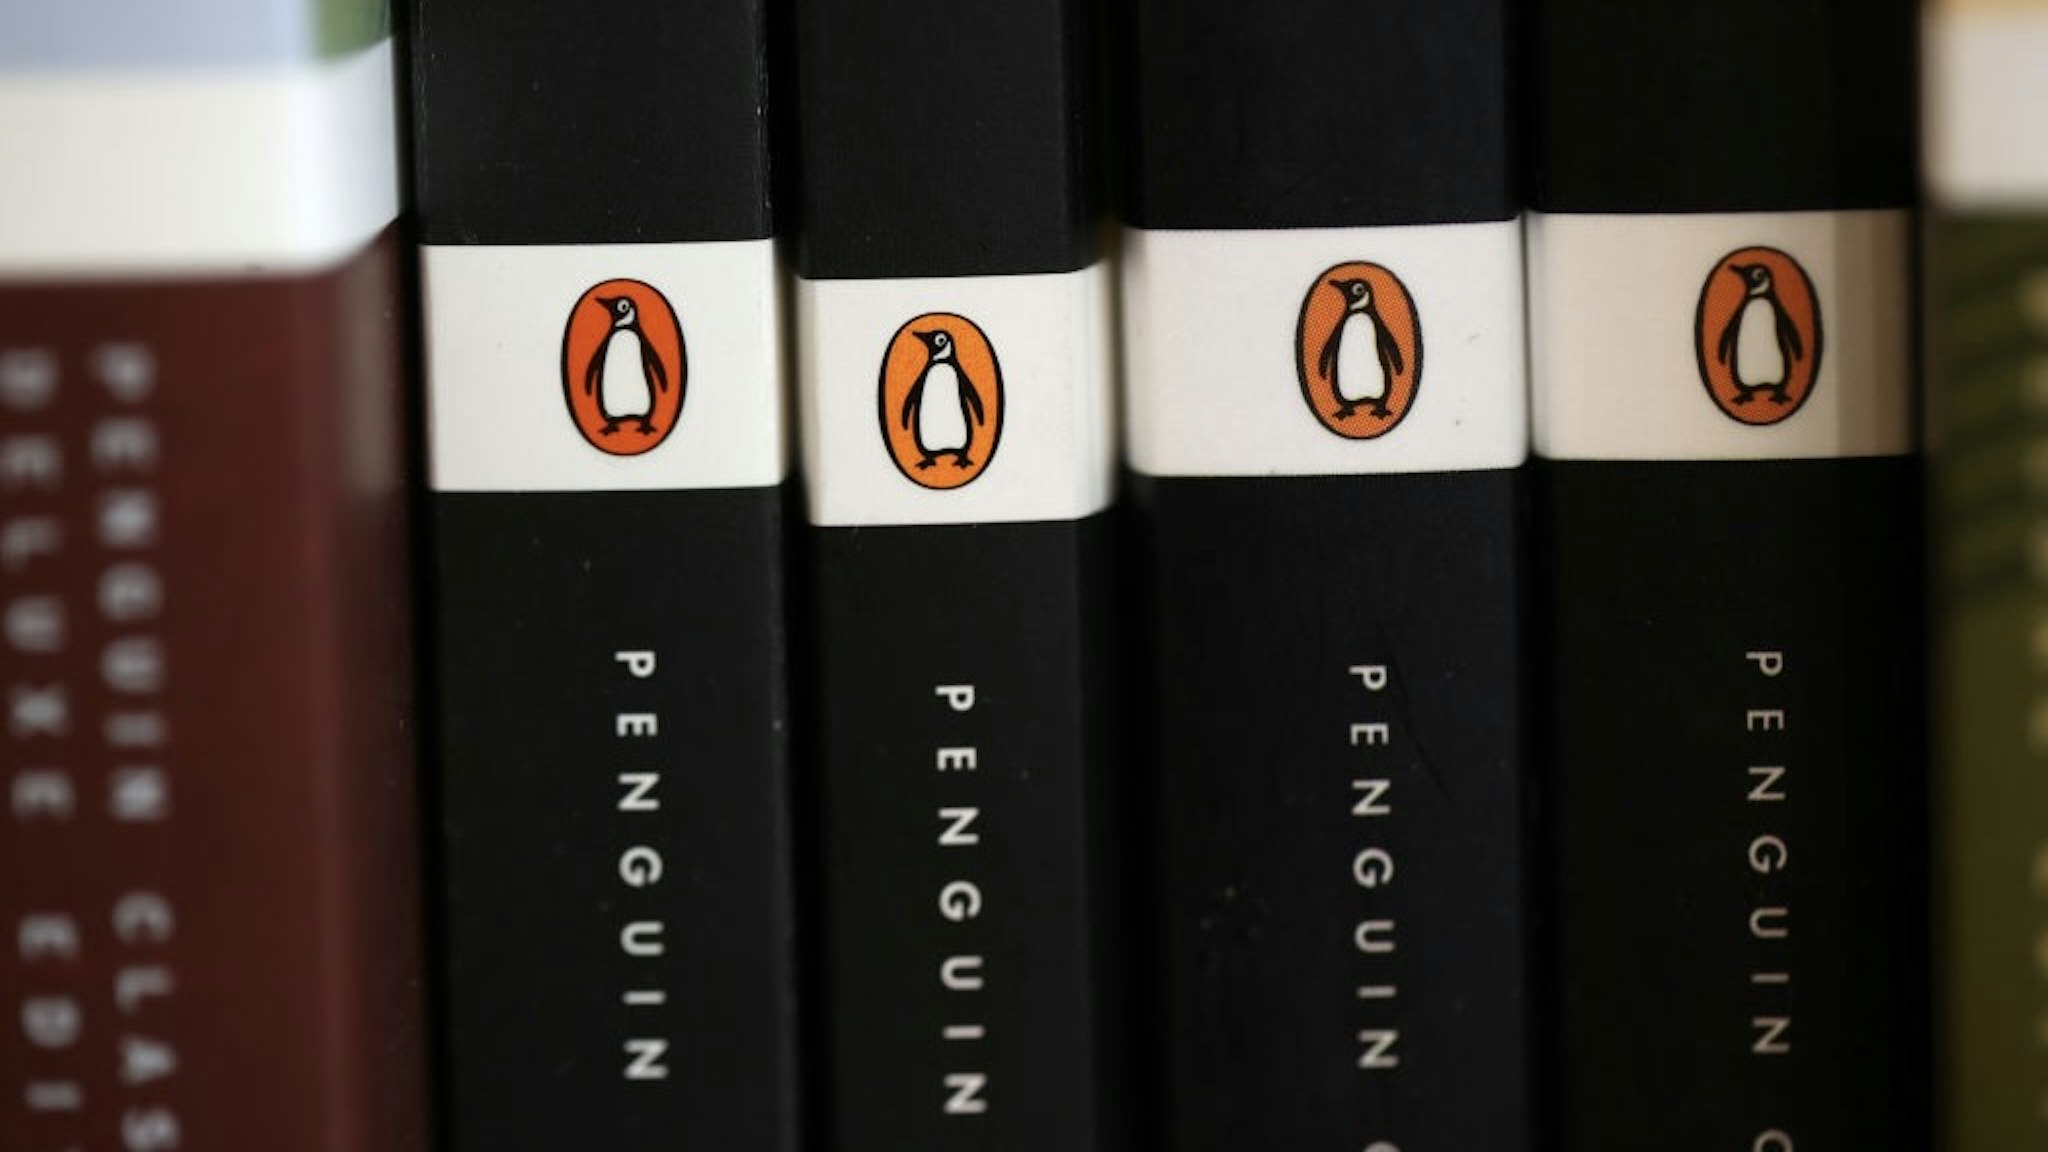 DOJ Sues To Block Penguin Random House's Acquisition Of Rival Simon And Schuster CORTE MADERA, CALIFORNIA - NOVEMBER 02: The Penguin logo is visible on the spines of books displayed on a shelf at Book Passage on November 02, 2021 in Corte Madera, California. The U.S. Department of Justice is suing Penguin Random House and Simon & Schuster to block the companies from completing a merger valued at $2.175 billion. (Photo by Justin Sullivan/Getty Images) Justin Sullivan / Staff